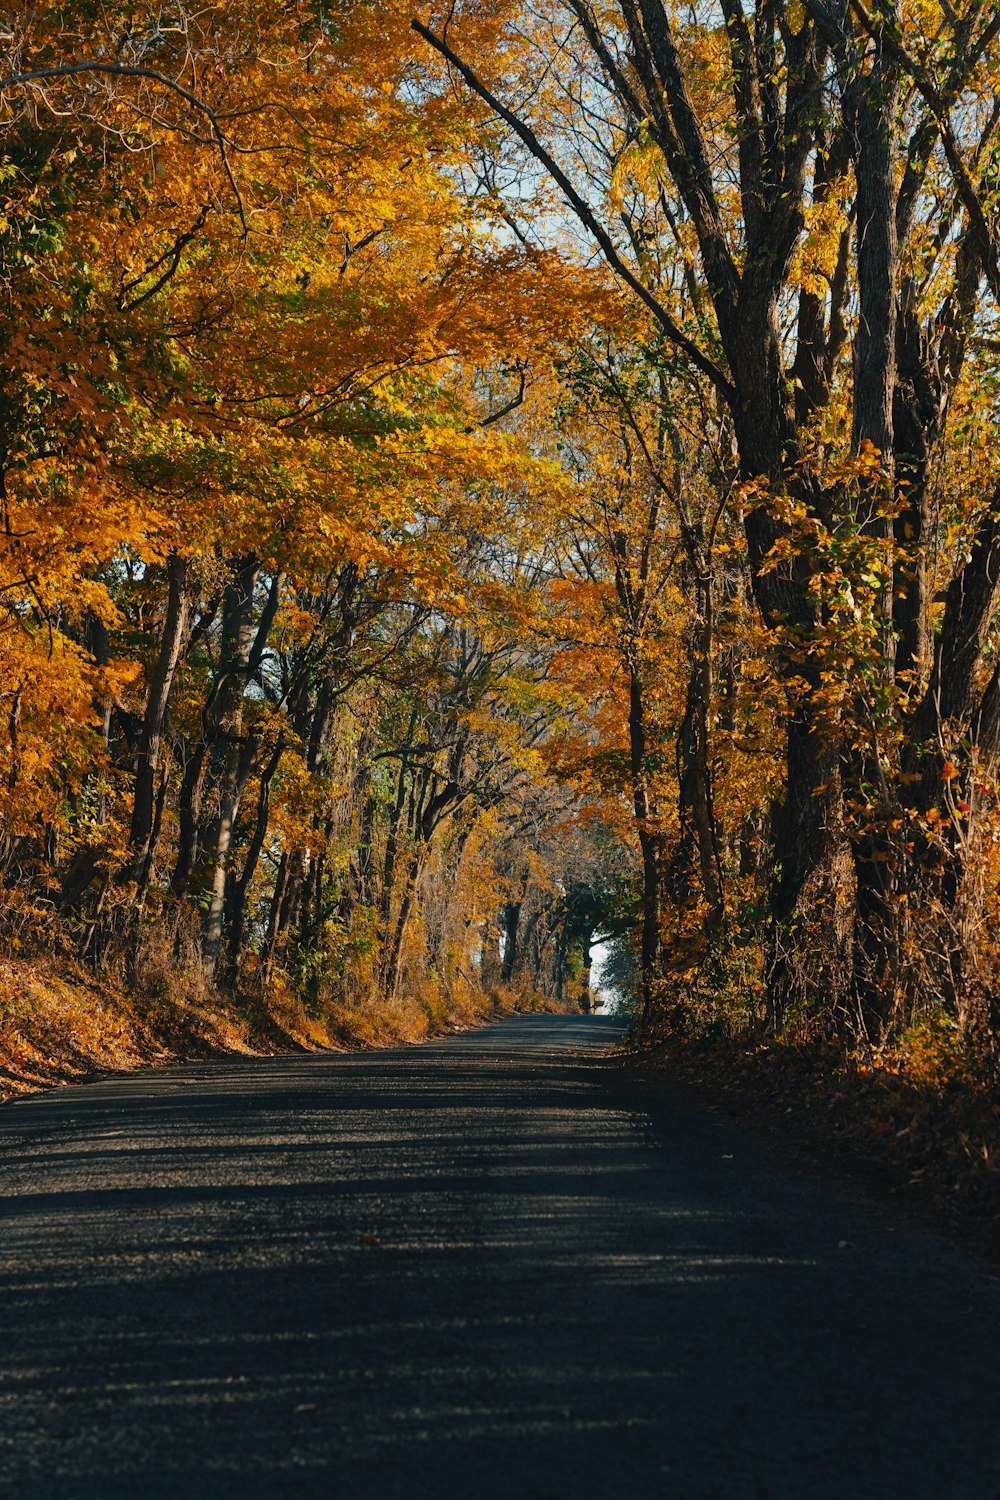 a road surrounded by trees with yellow leaves